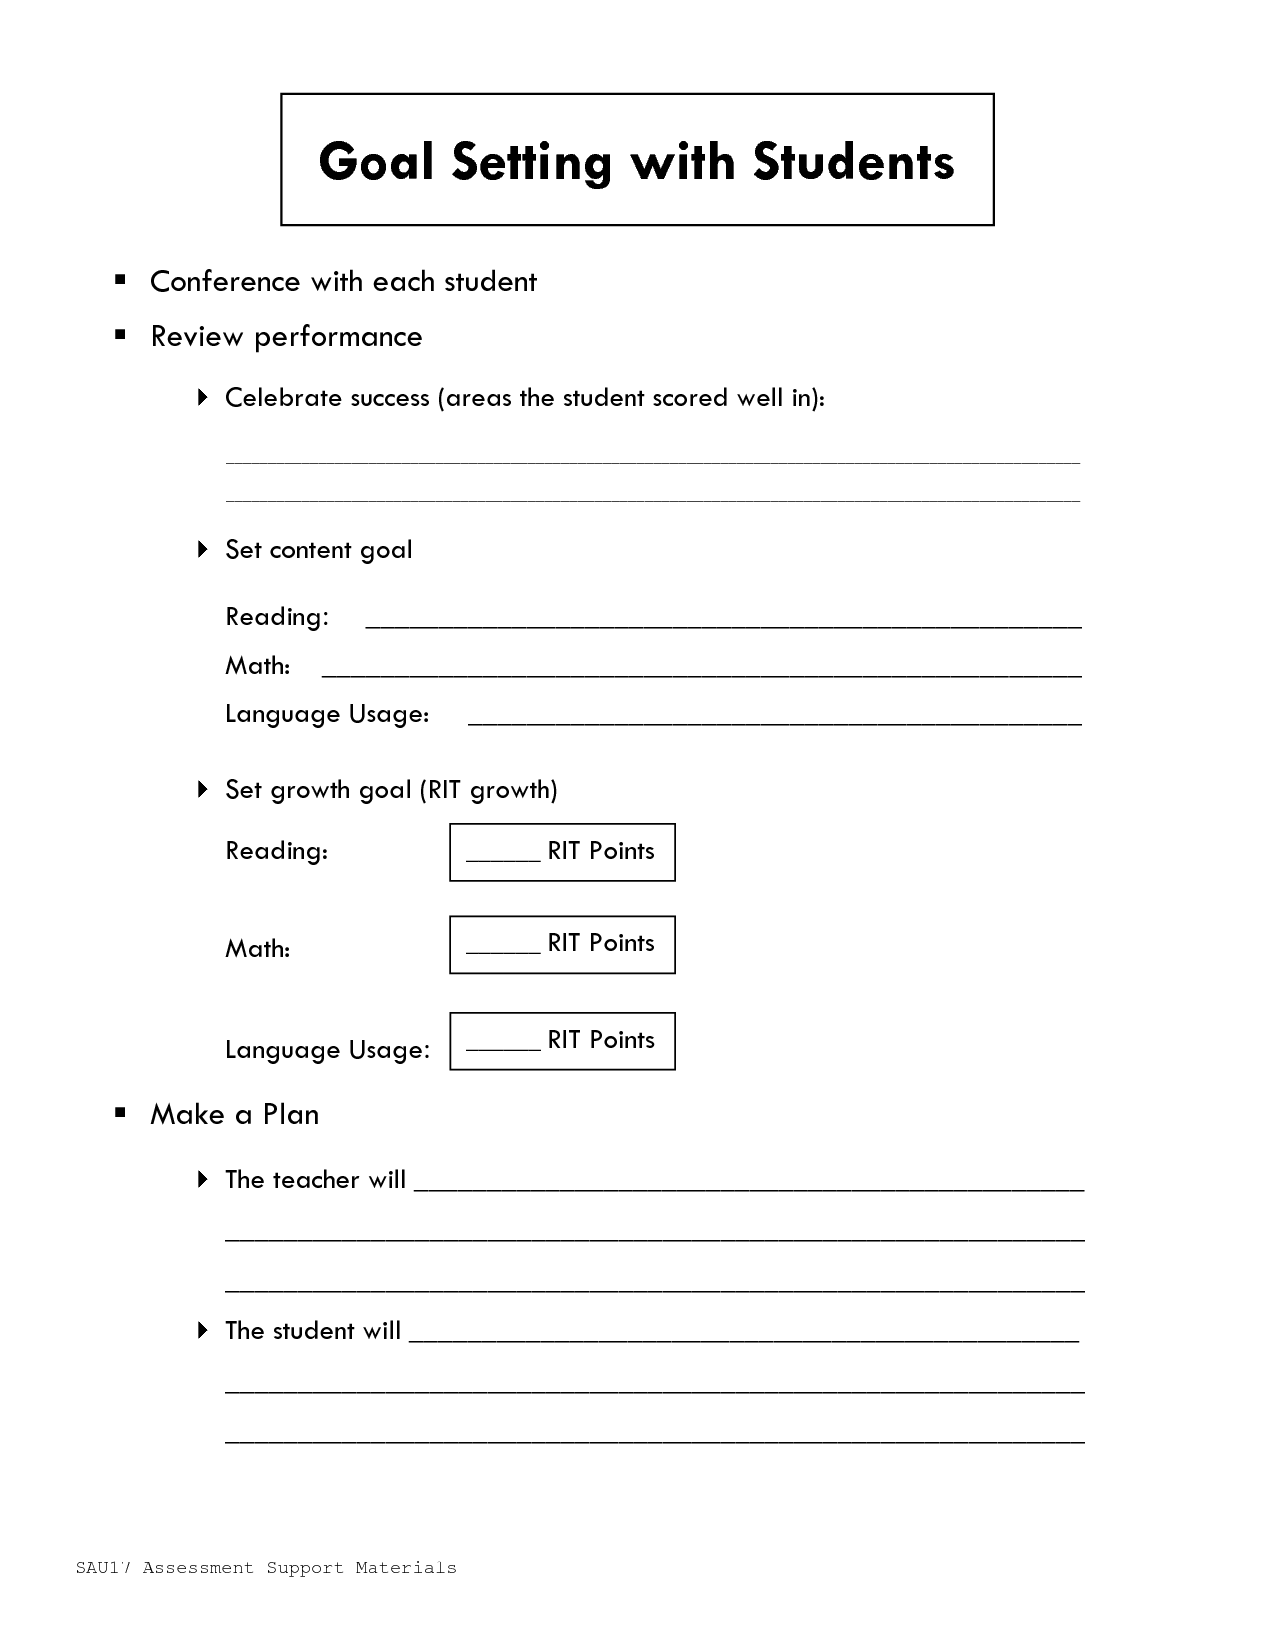 Student Goal Setting Form Template Image